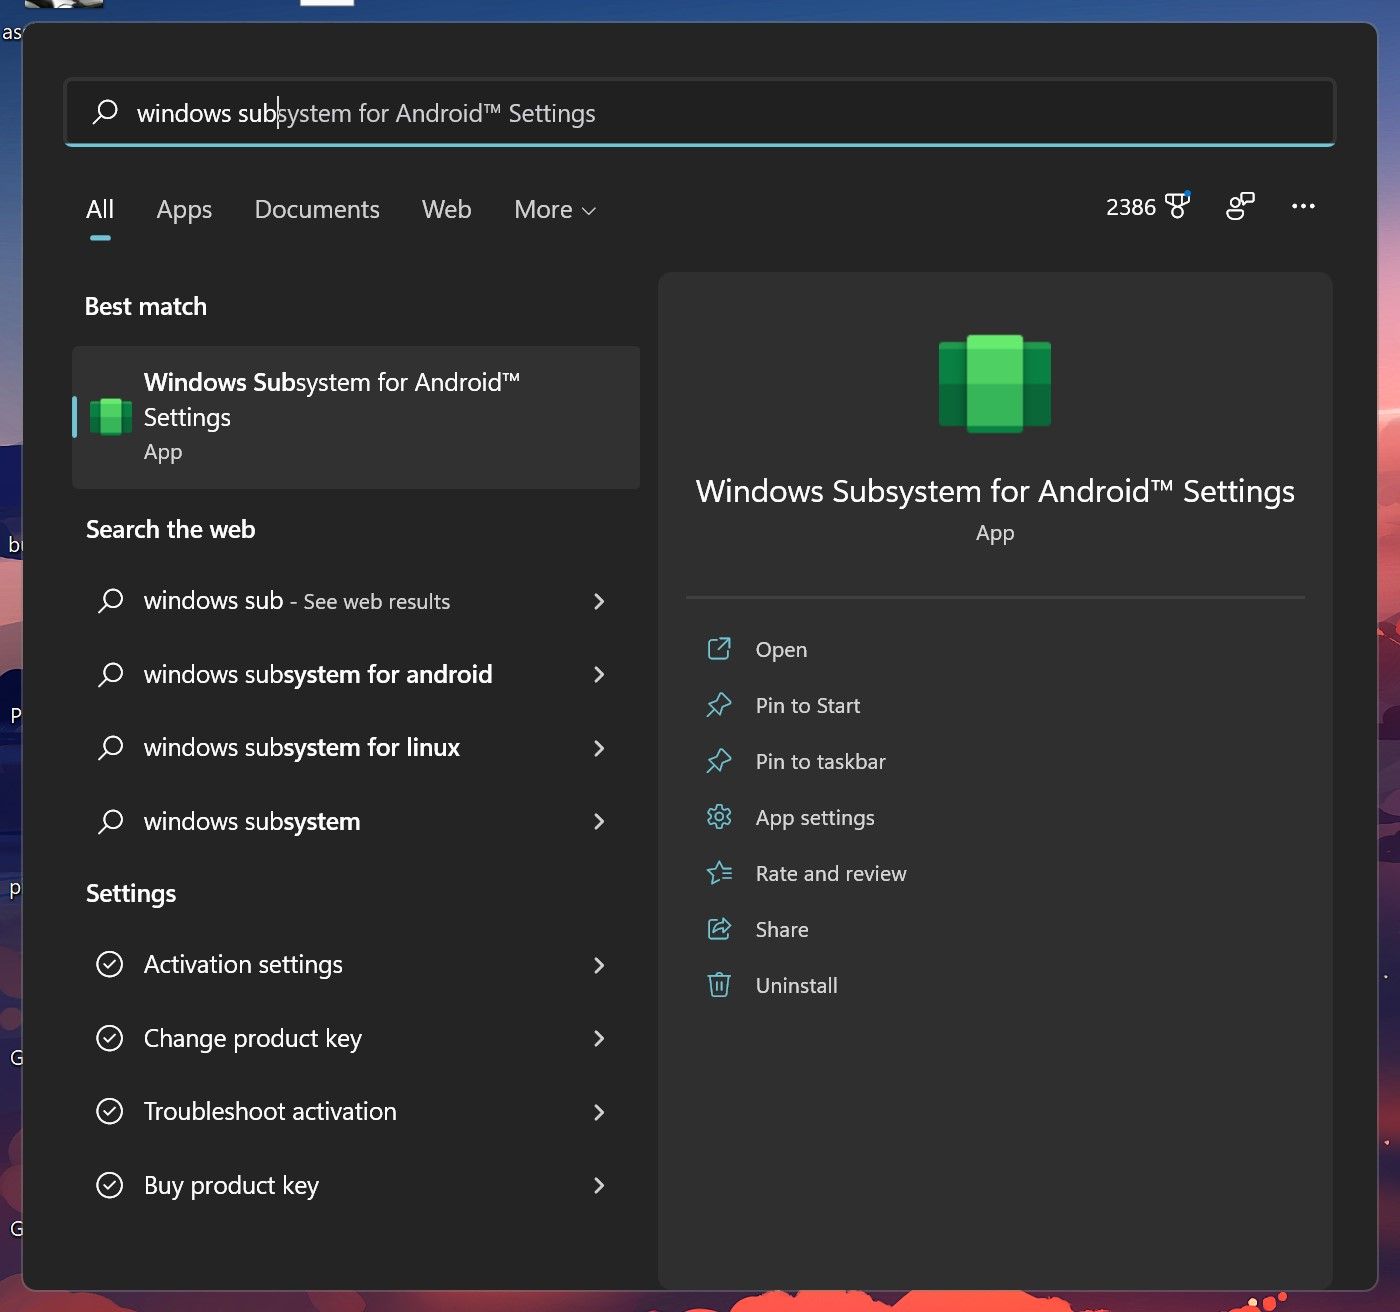 The Windows 11 start menu with Windows Subsystem for Android Settings highlighted in the search results.